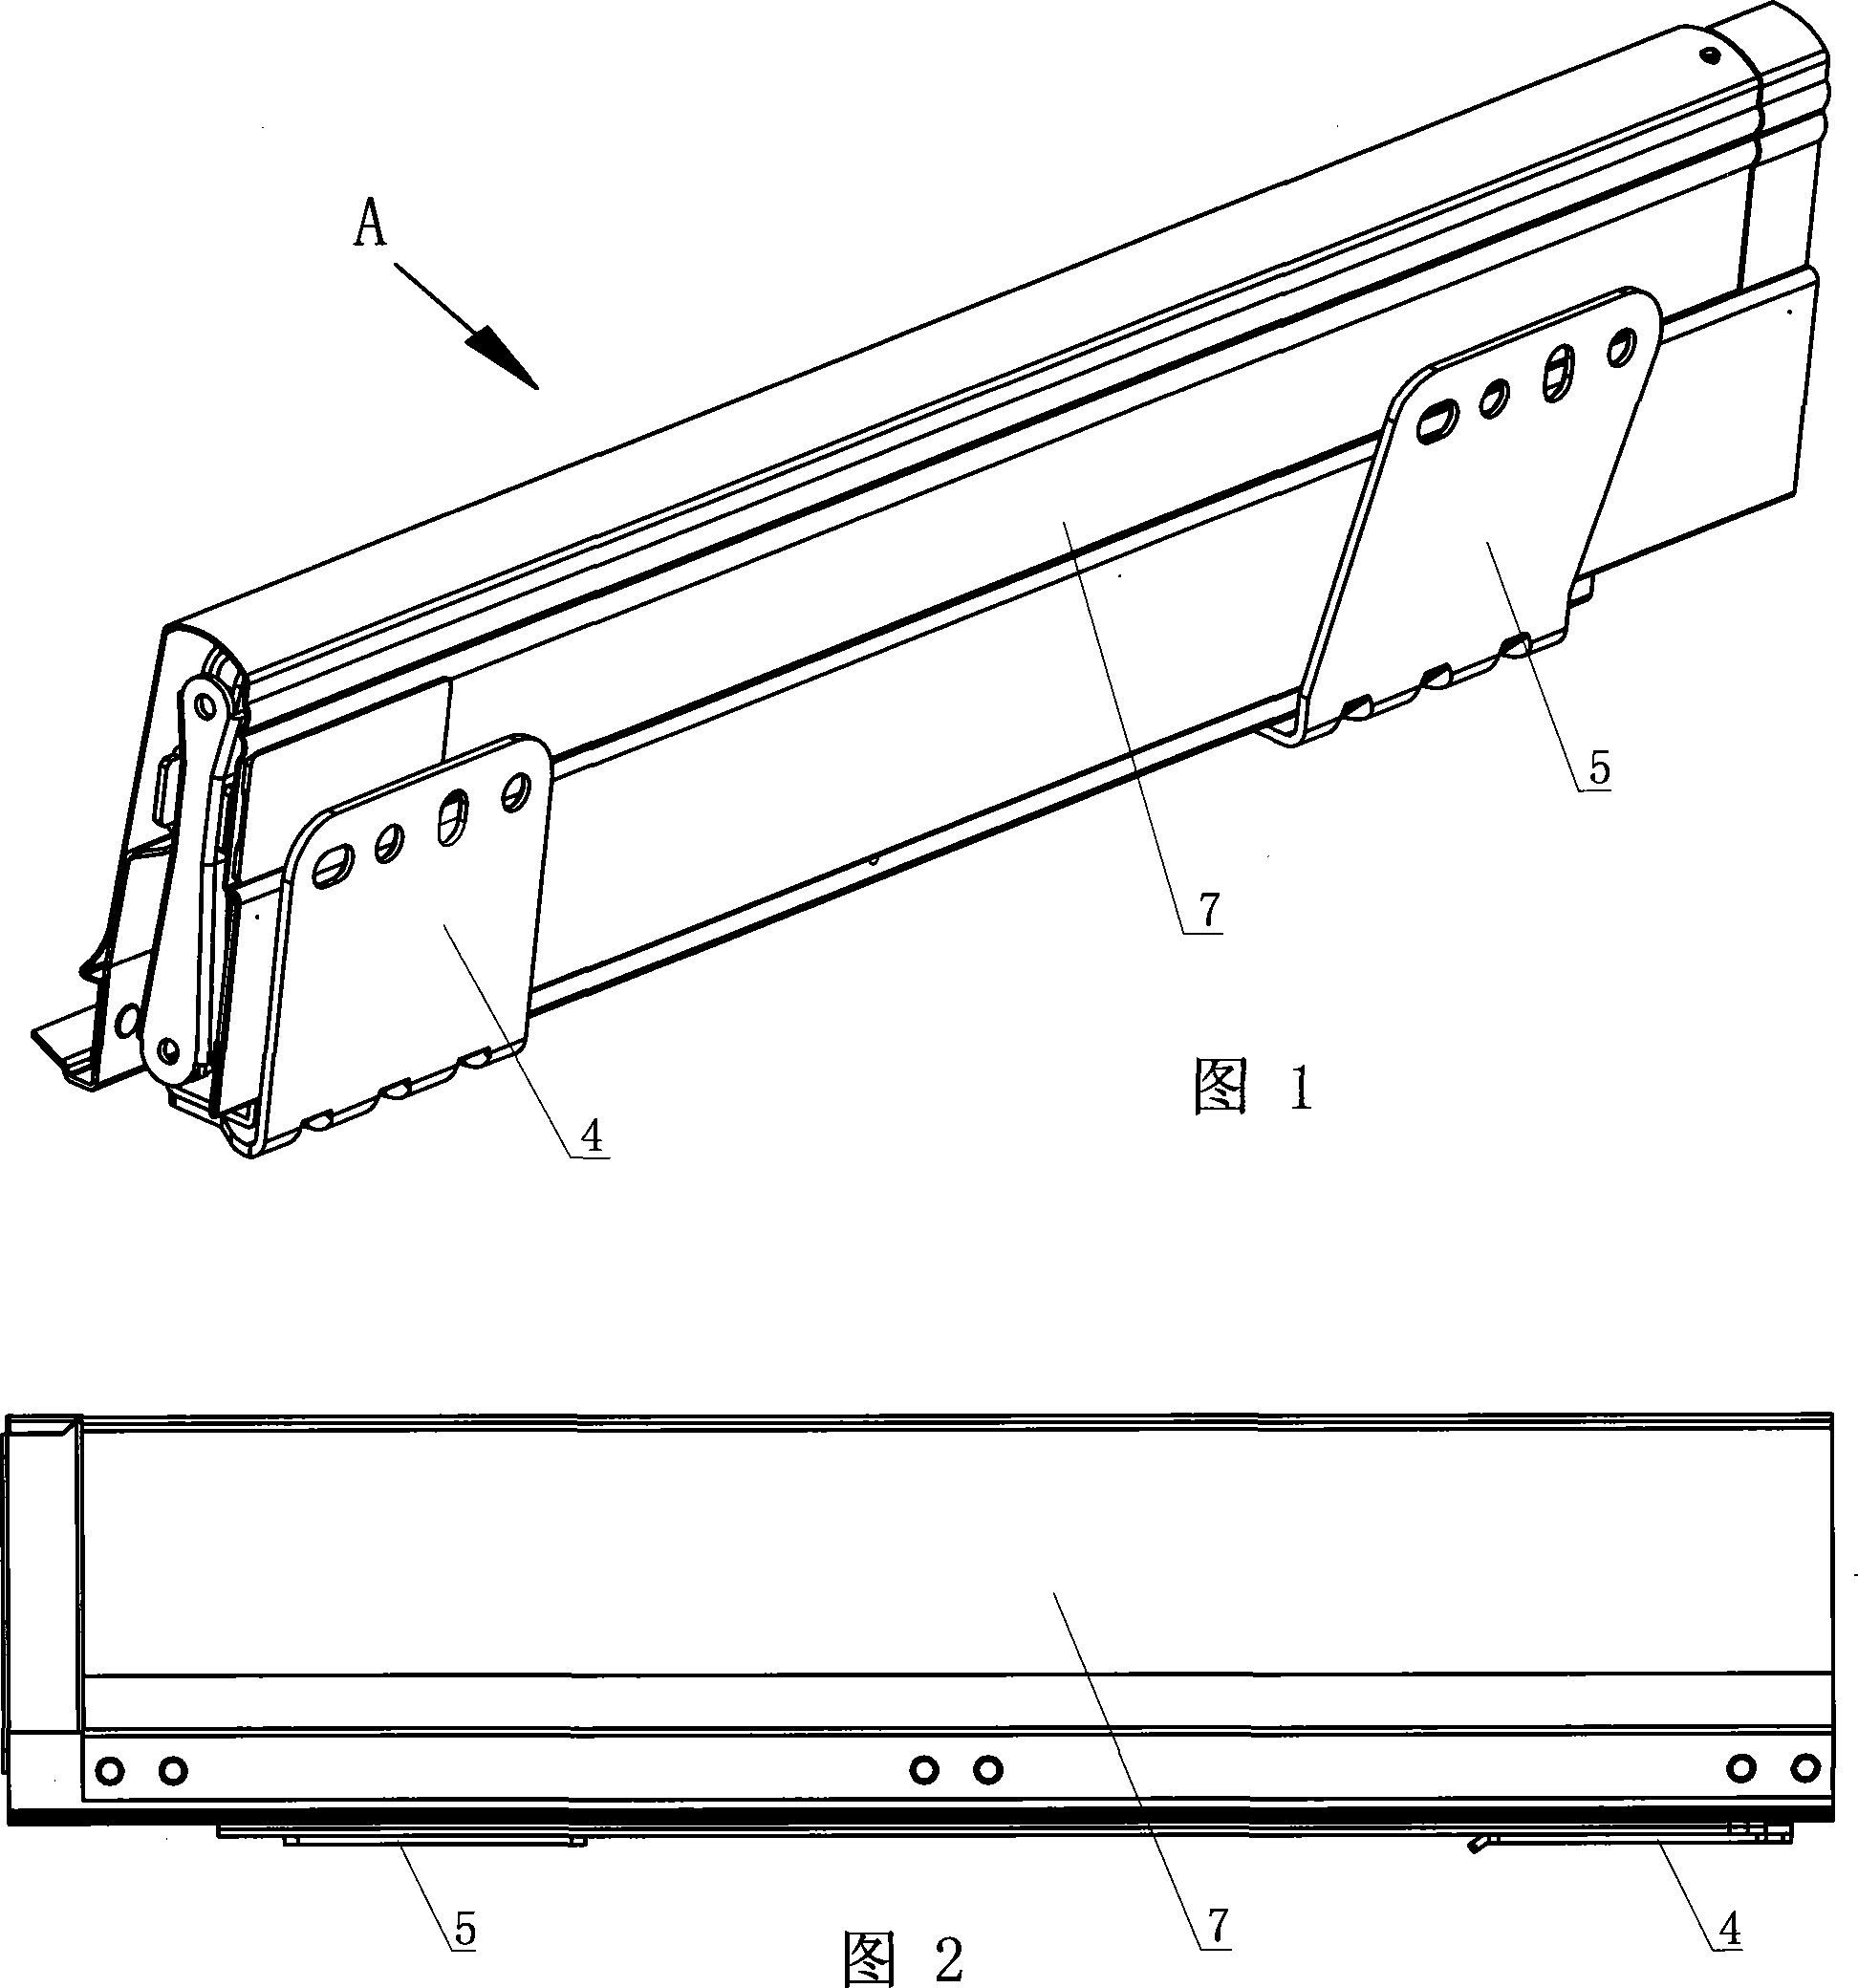 Integrated drawer guide rail